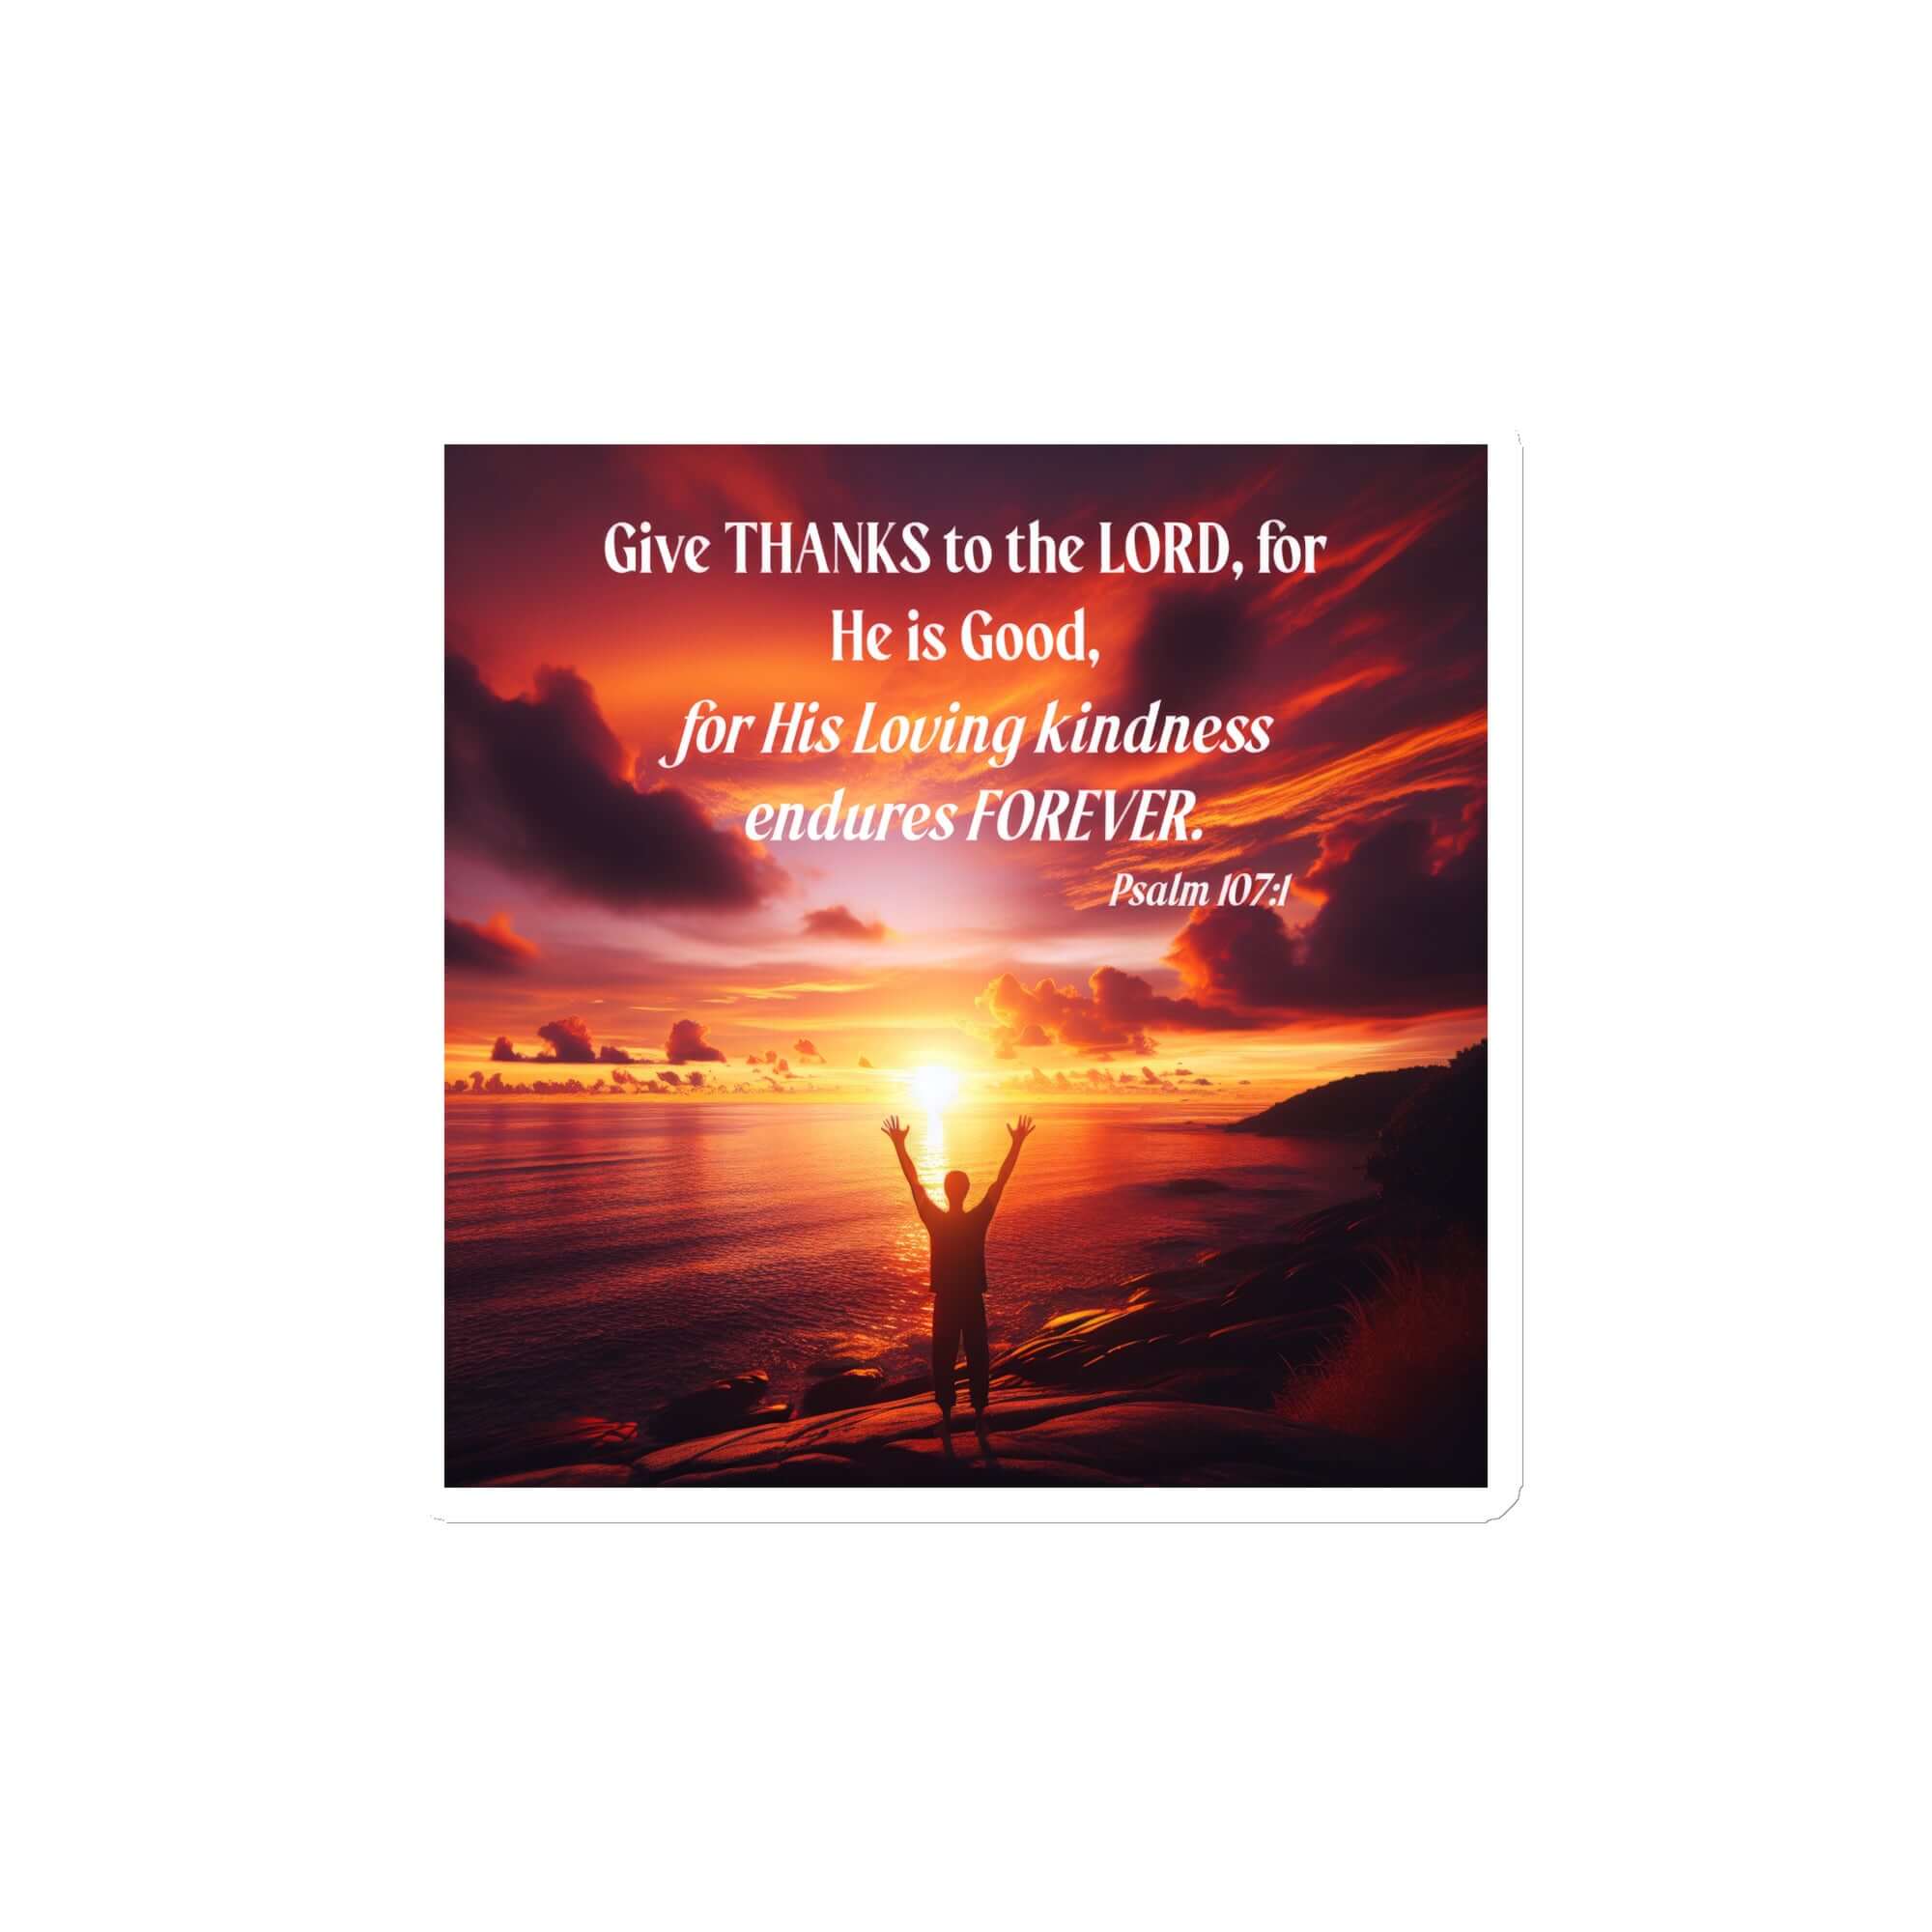 Psalm 107:1 - Bible Verse, Give Thanks to the Lord Die-Cut Magnet